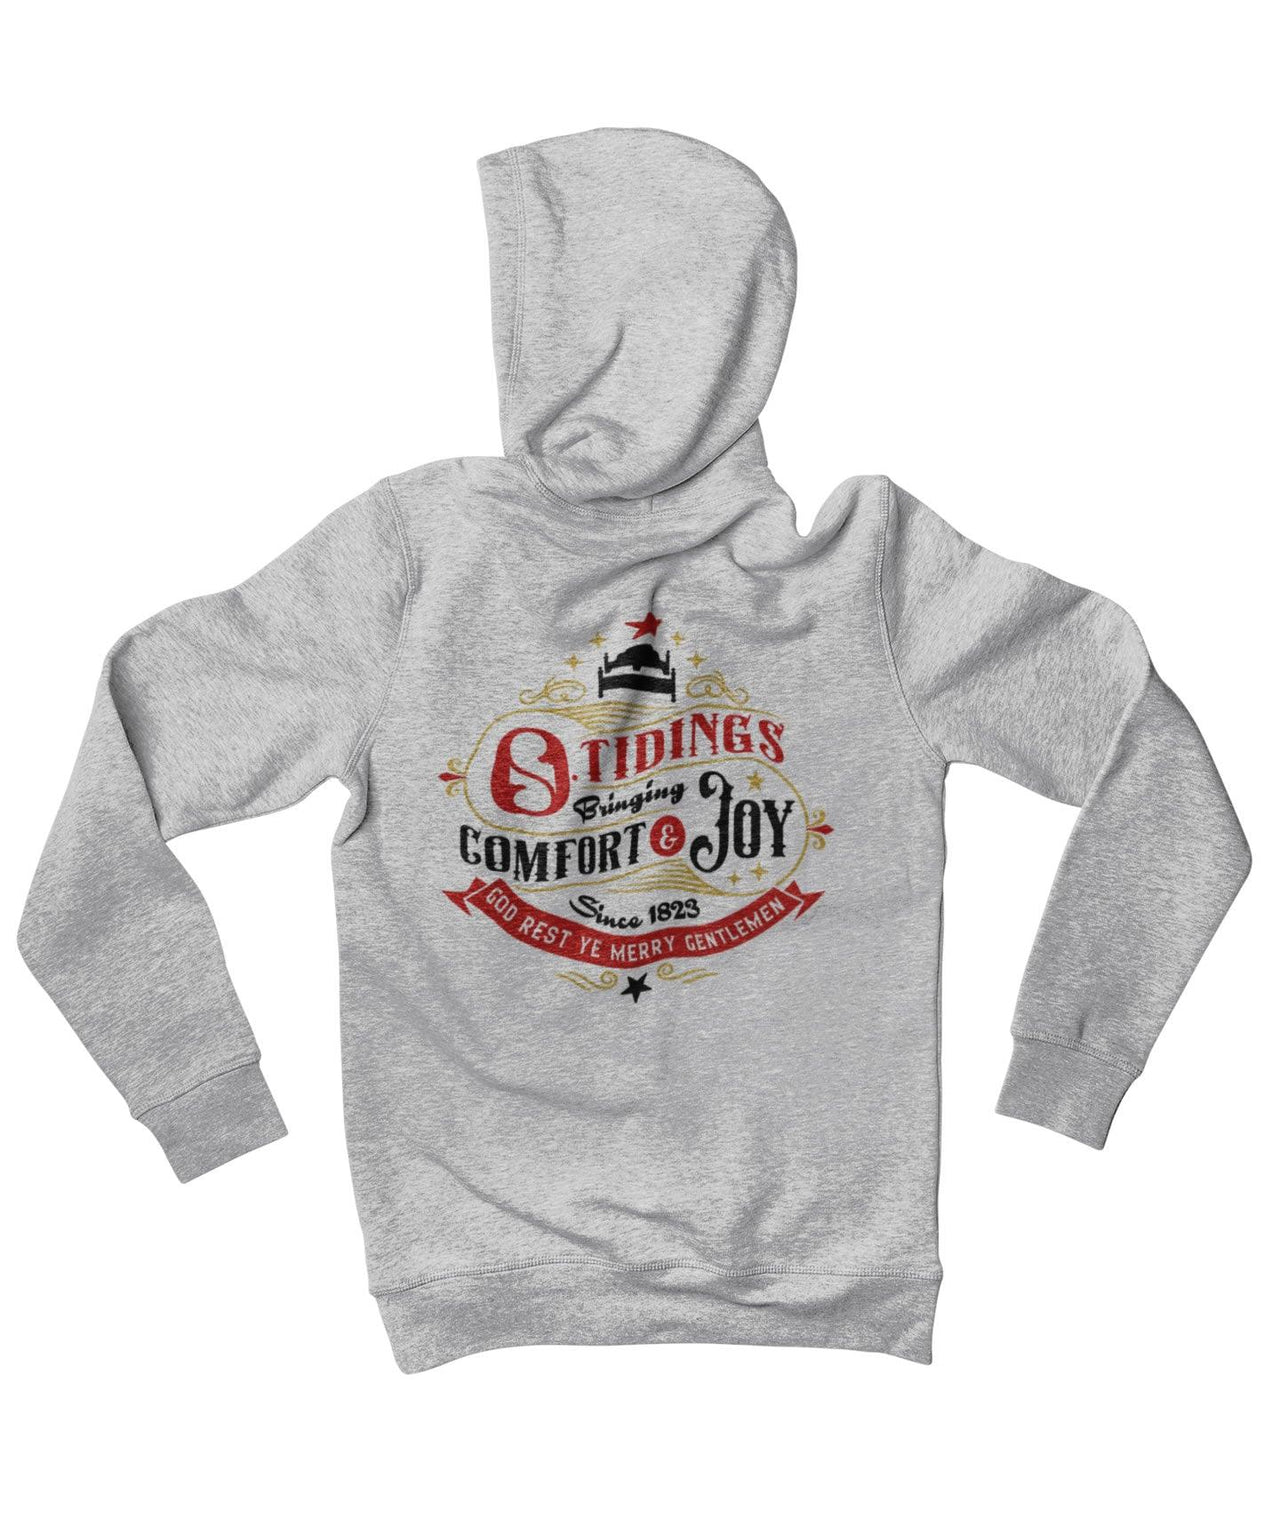 Comfort and Joy Colour Back Printed Christmas Hoodie For Men and Women 8Ball